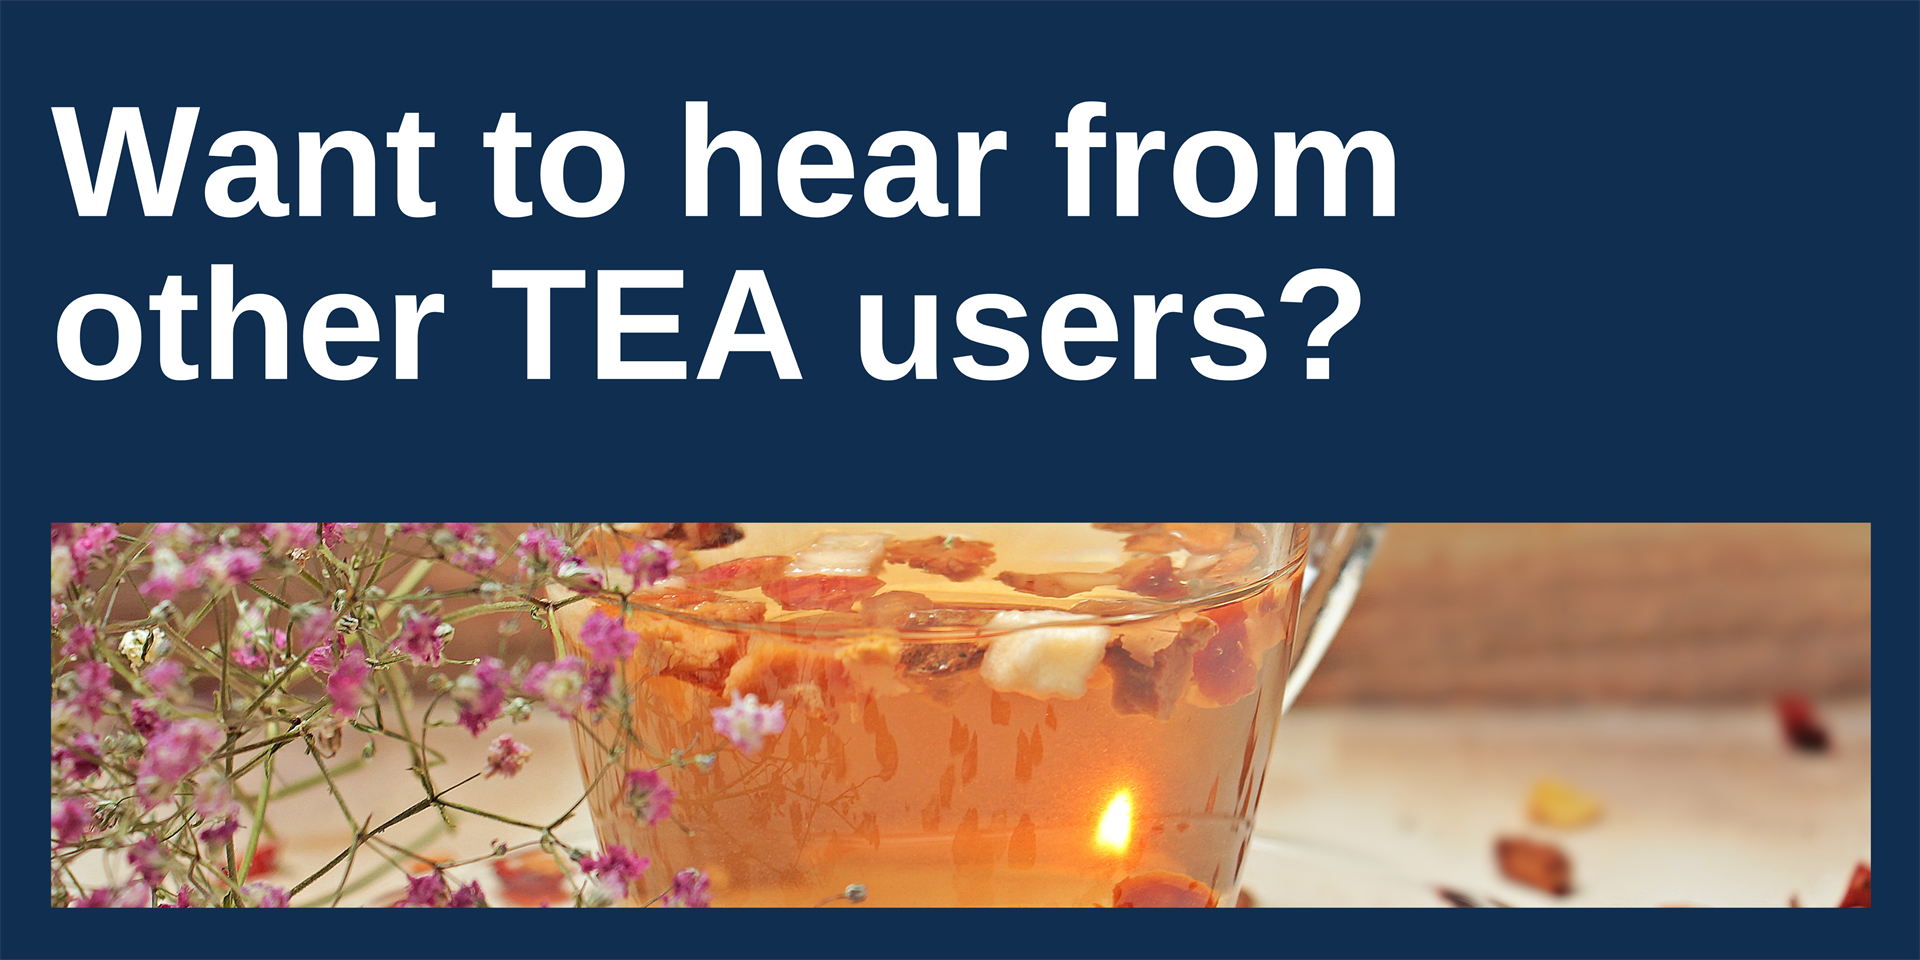 What to hear from other TEA users?